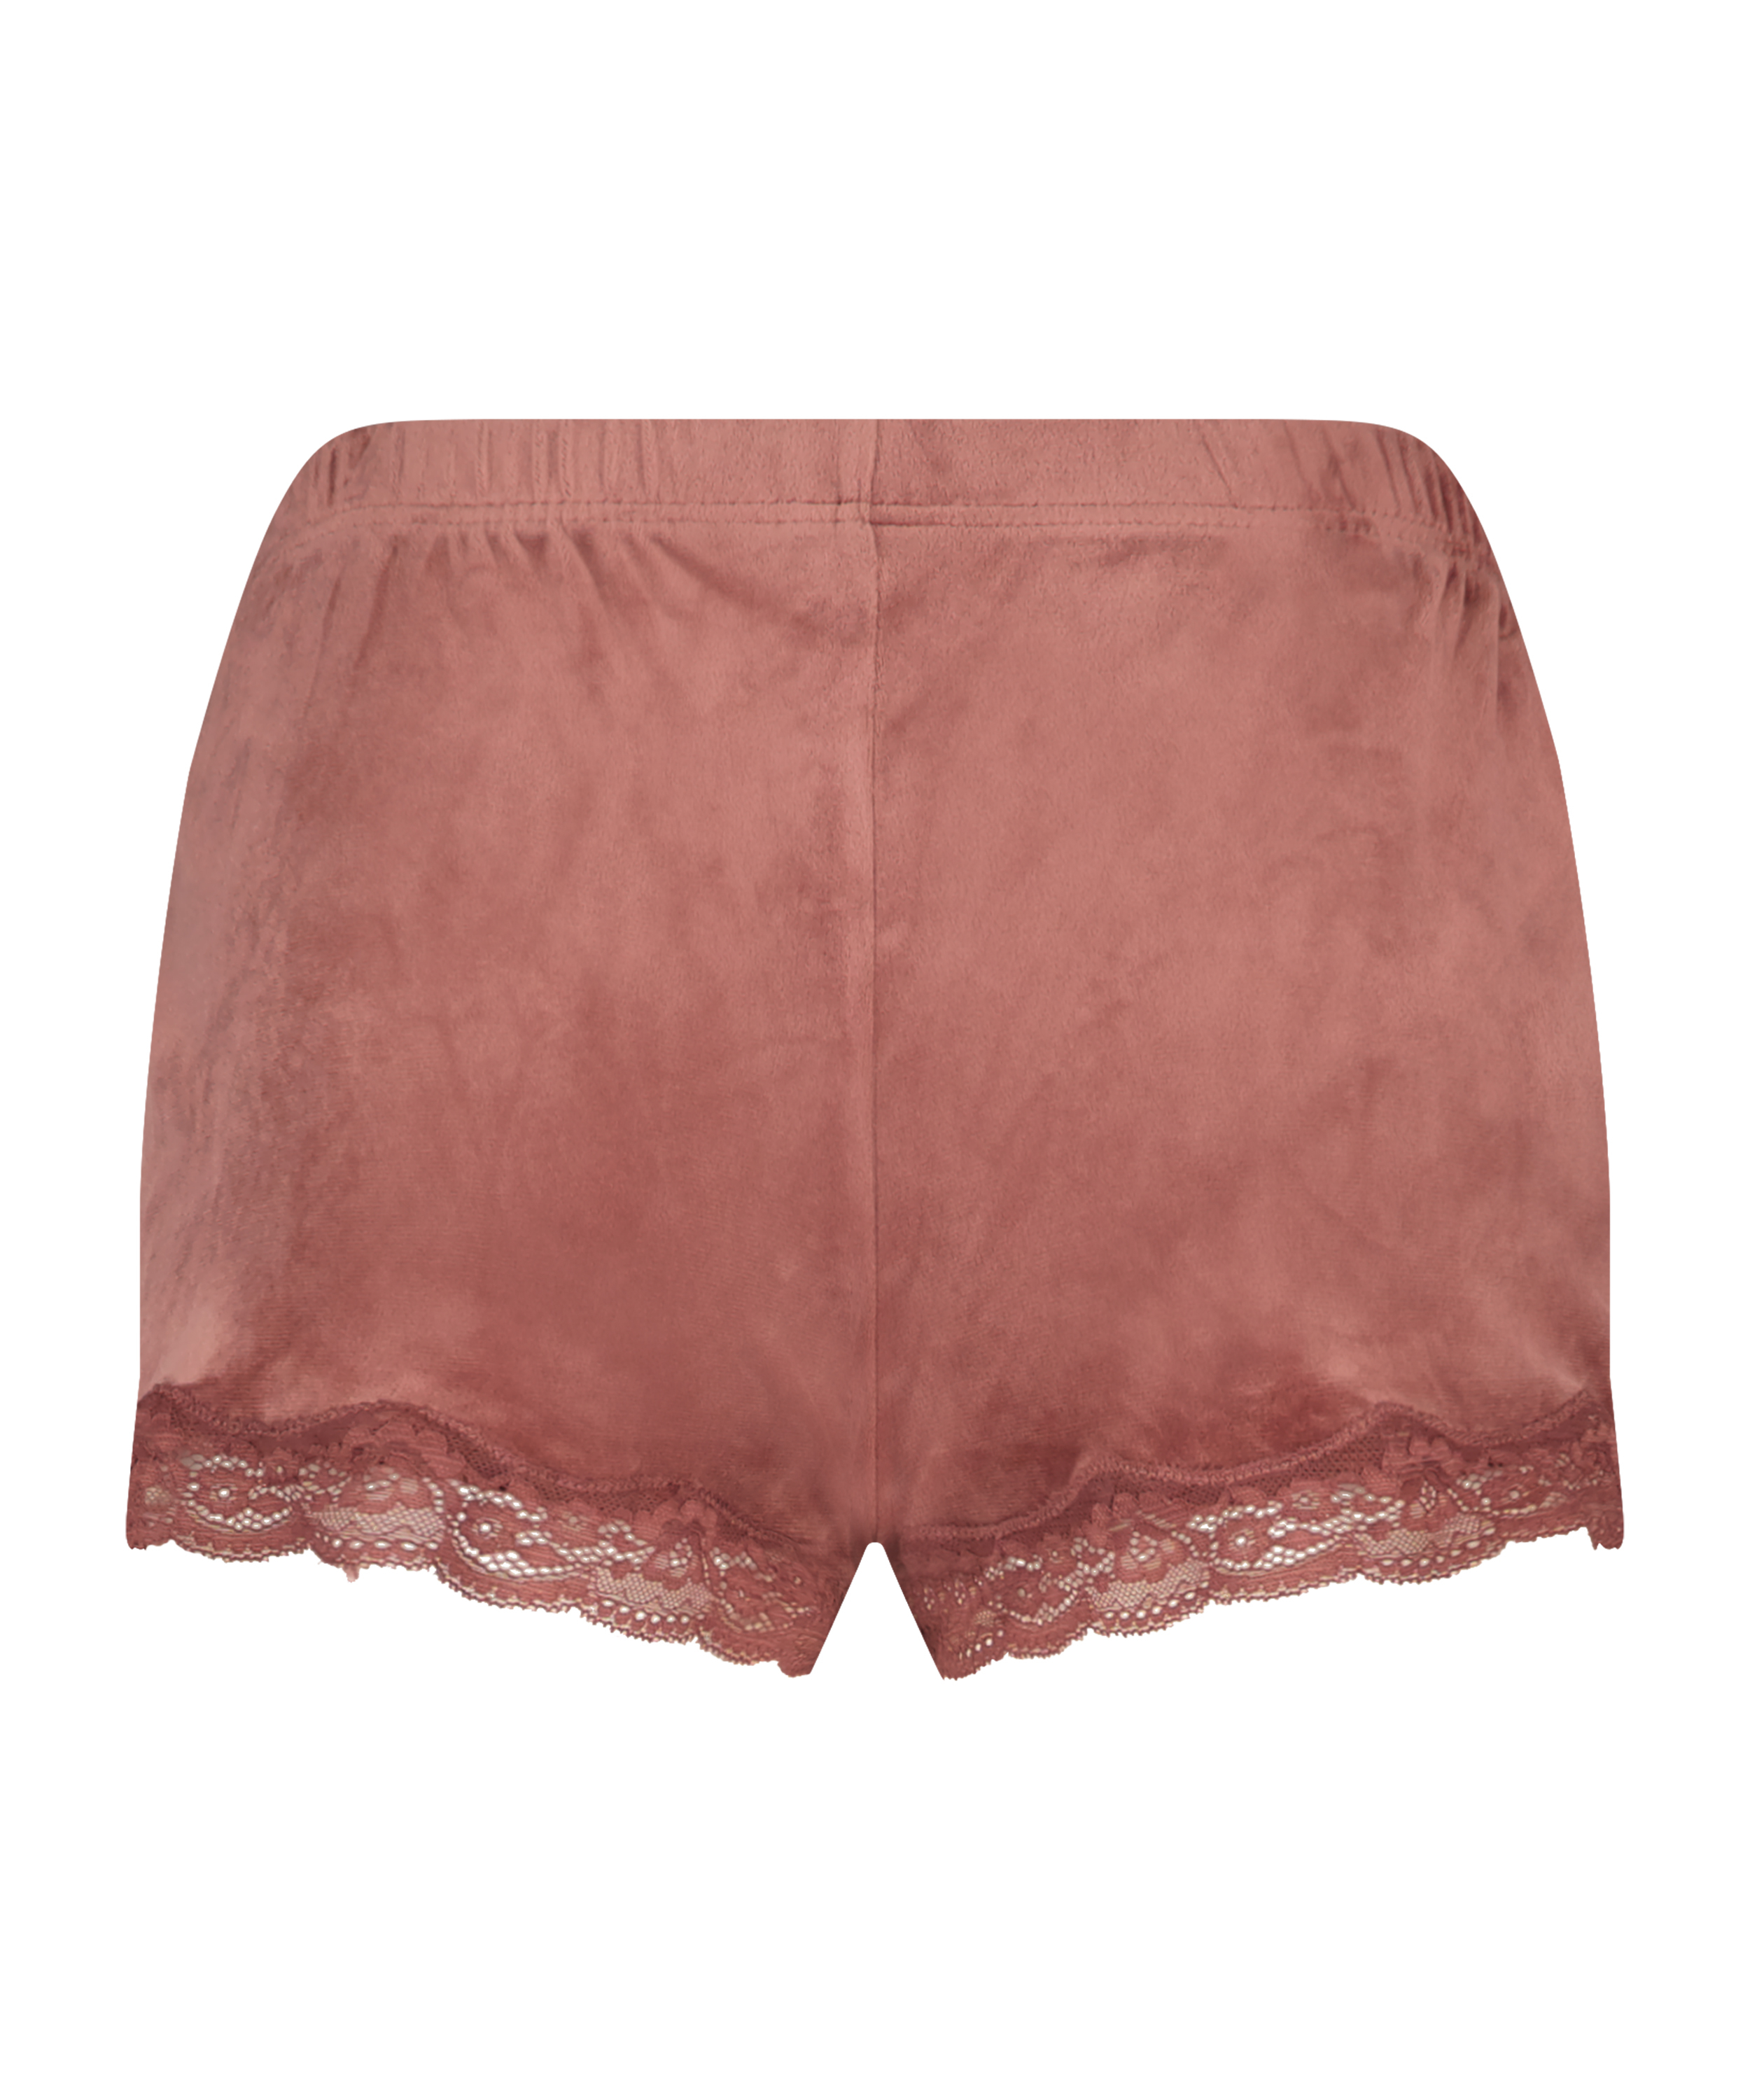 Shorts velour Lace, pink, main